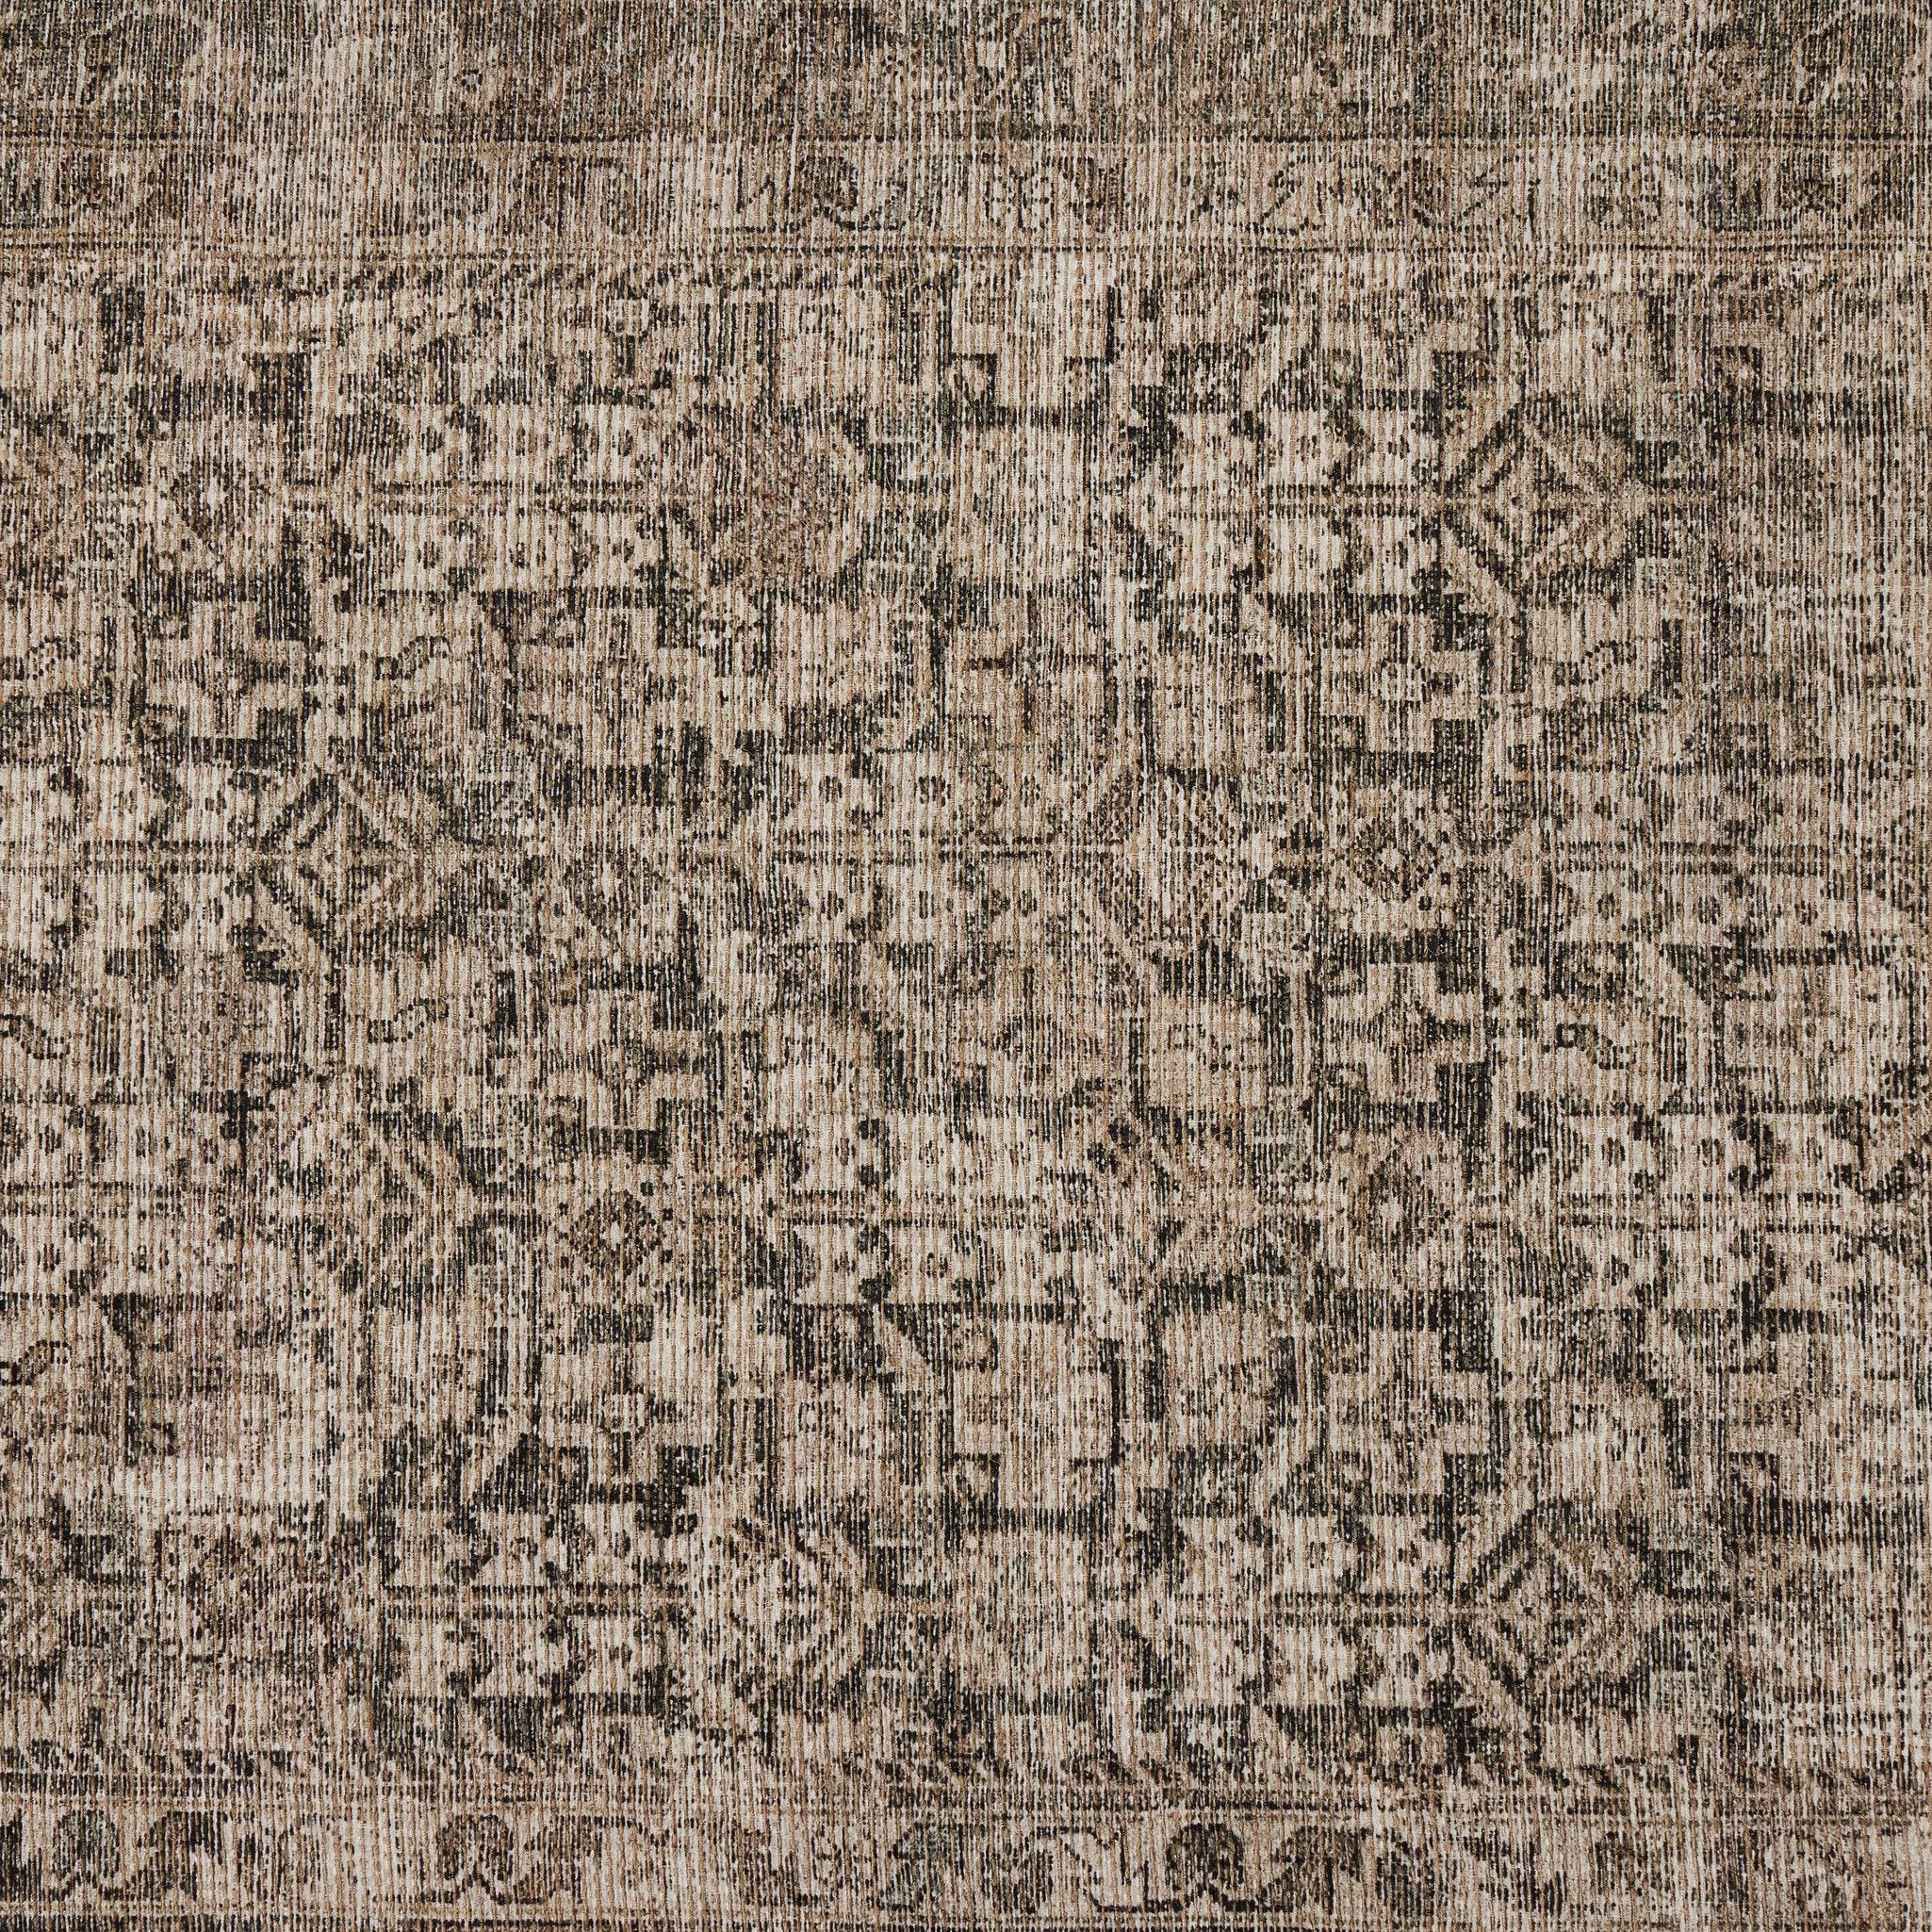 Power-loomed in Egypt, a textural jute-blend area rug is printed to mimic an authentic vintage rug design.Overall Dimensions30.00"w x 0.50"d x 90.00"hFull Details &amp; SpecificationsTear SheetCleaning Code : X (vacuum Or Light Brush, No Cleaning Products Amethyst Home provides interior design, new home construction design consulting, vintage area rugs, and lighting in the Omaha metro area.